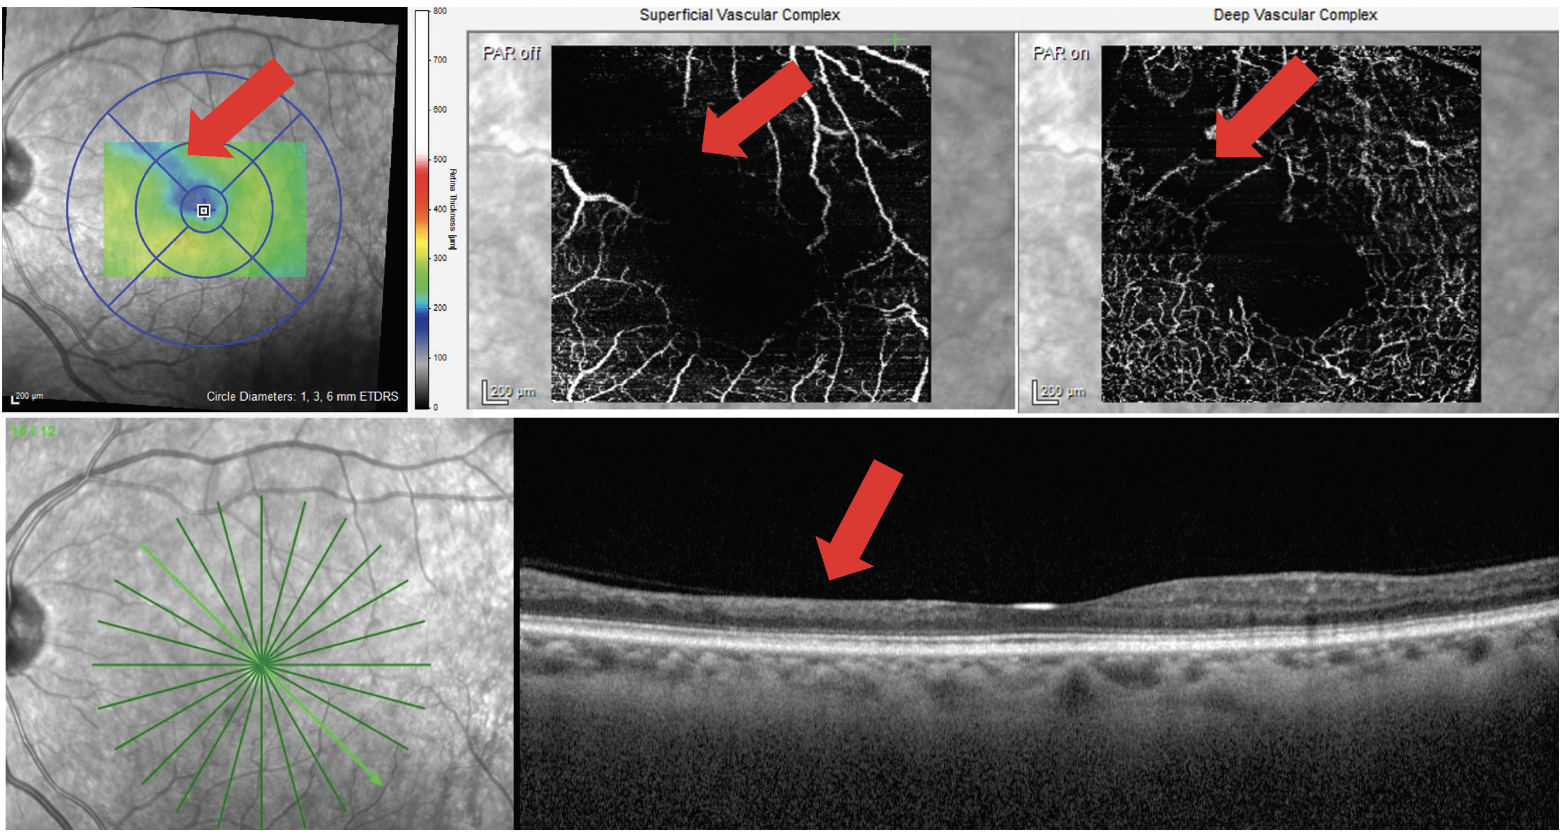 Fig. 9. A patient with DR presents with a localized area of inner retinal thinning on OCT cross-section scan. This corresponds to an area of macular thinning on the thickness map (top left image) as well as capillary non-perfusion in the superficial and deep capillary plexi (top middle and top right images).